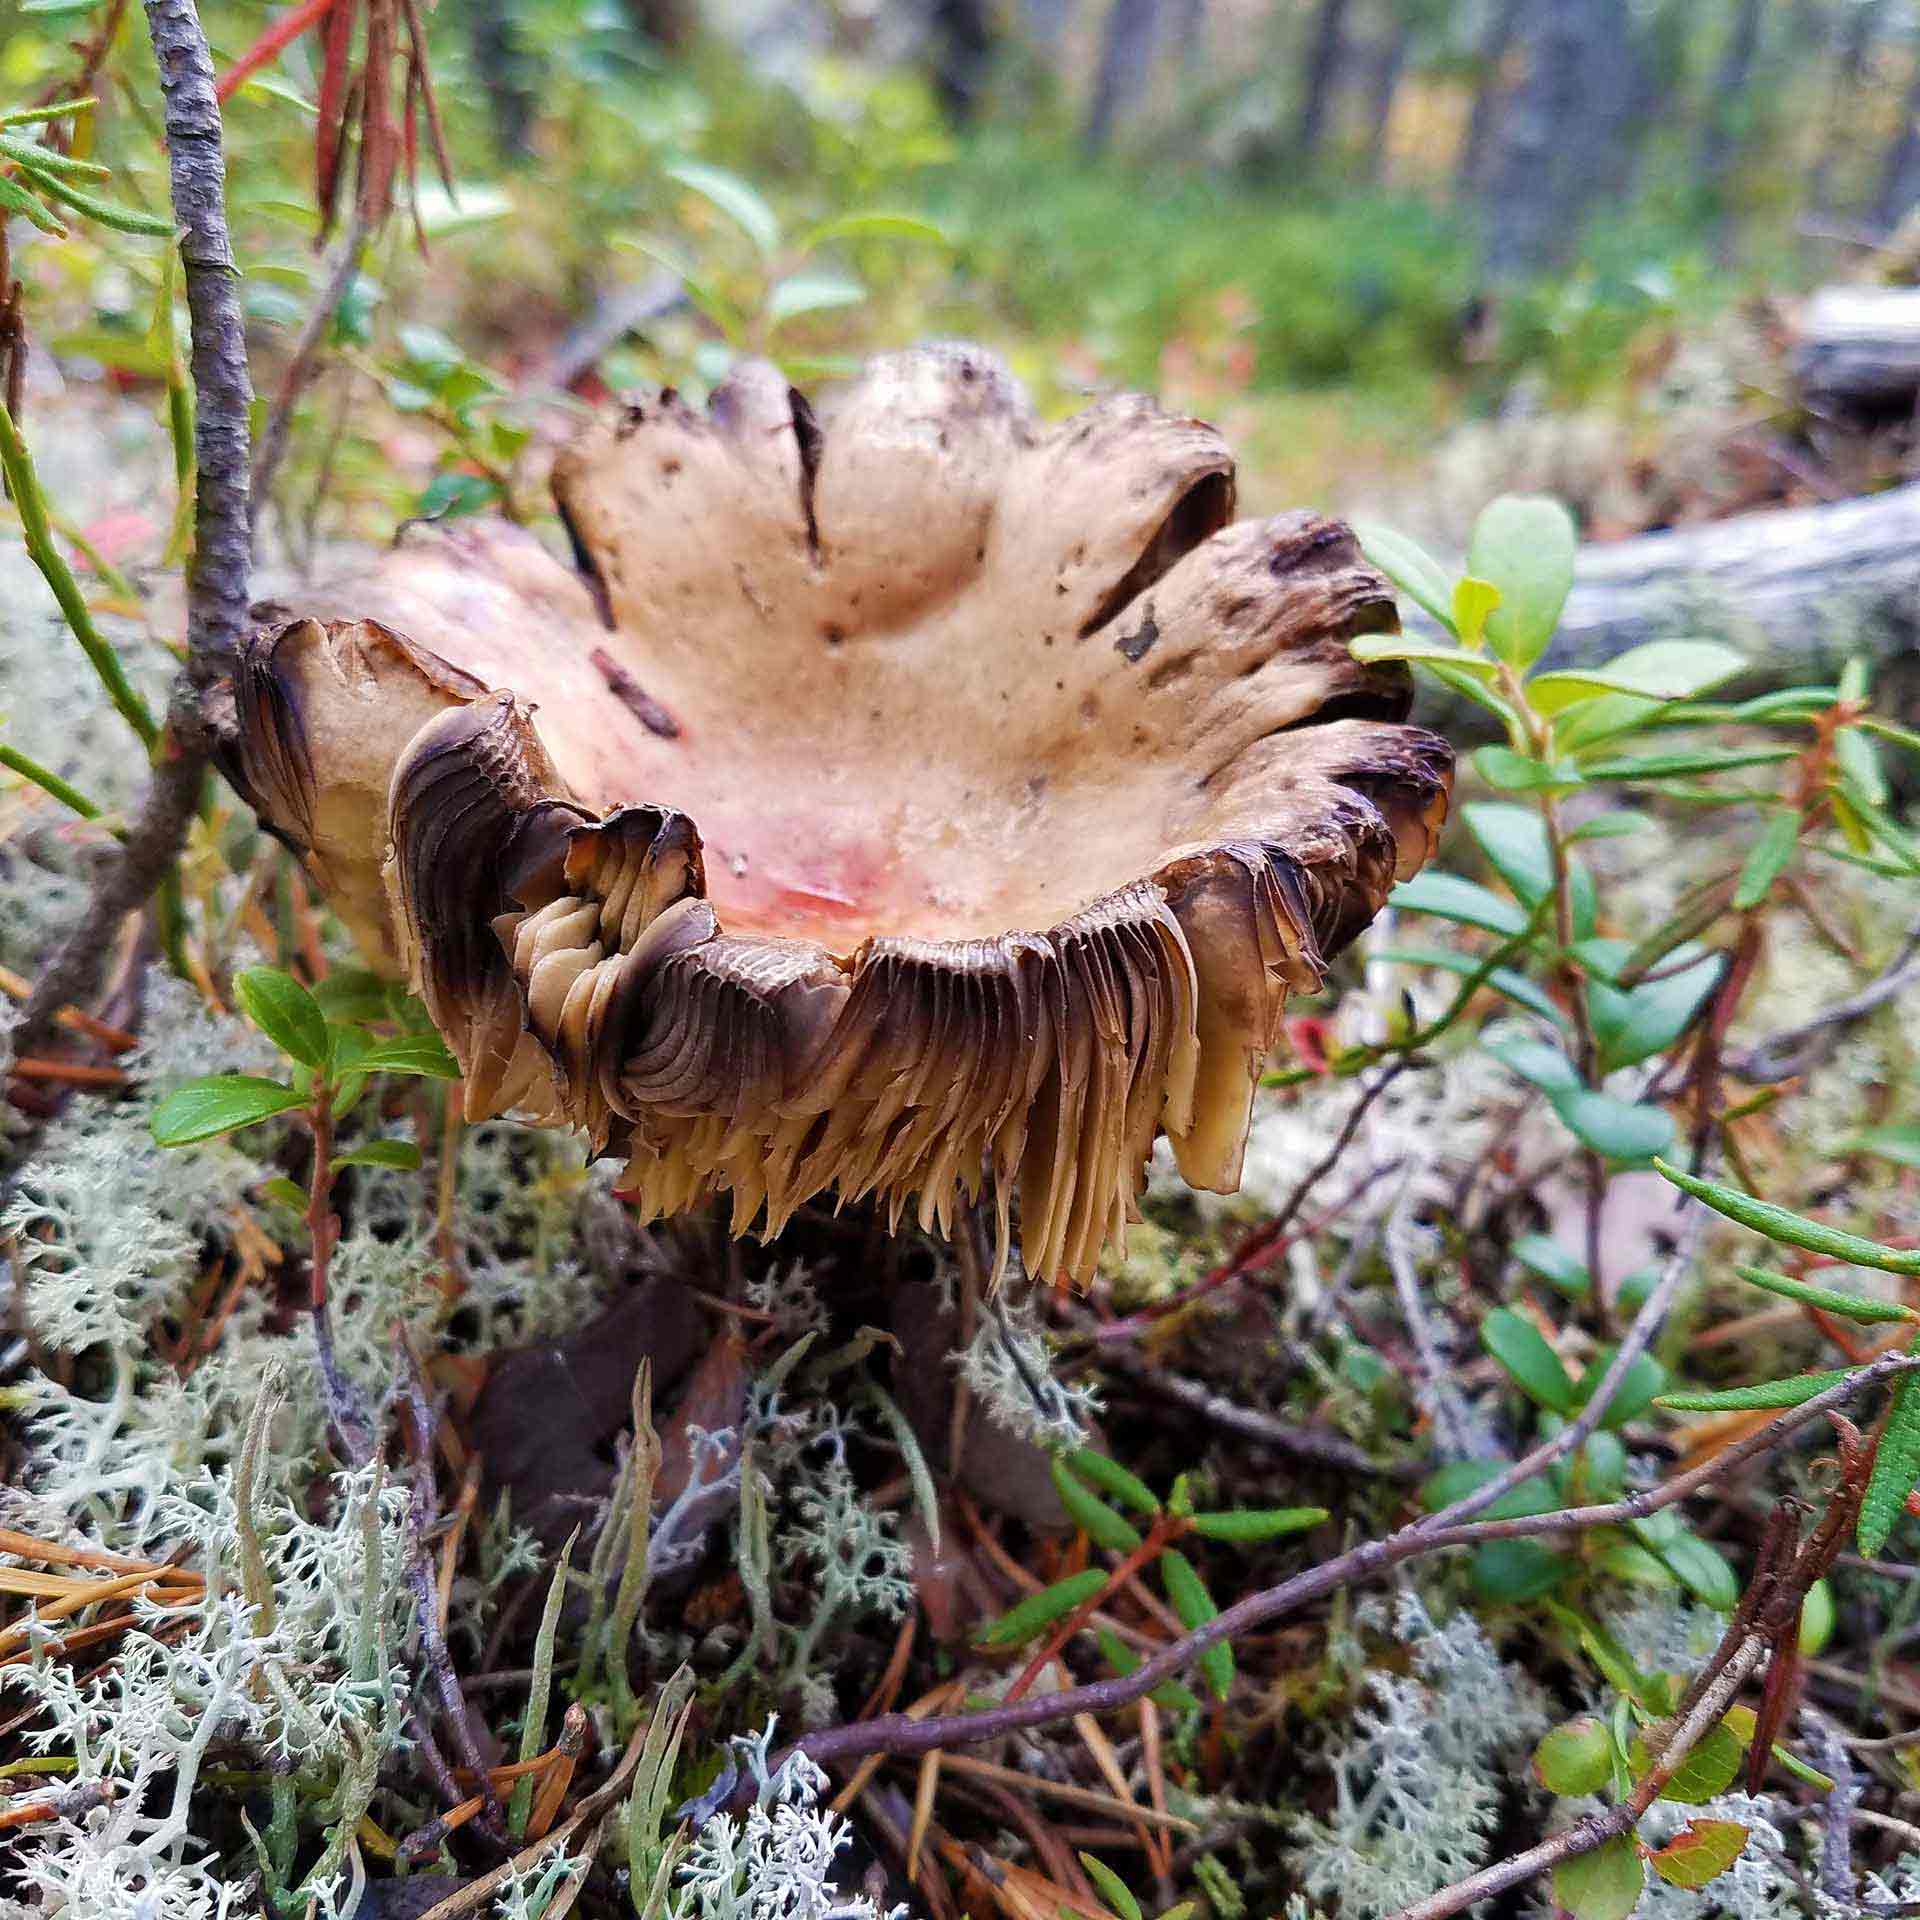 A brown mushroom and reindeer lichen in macro mode I found along a nature walk in Inari